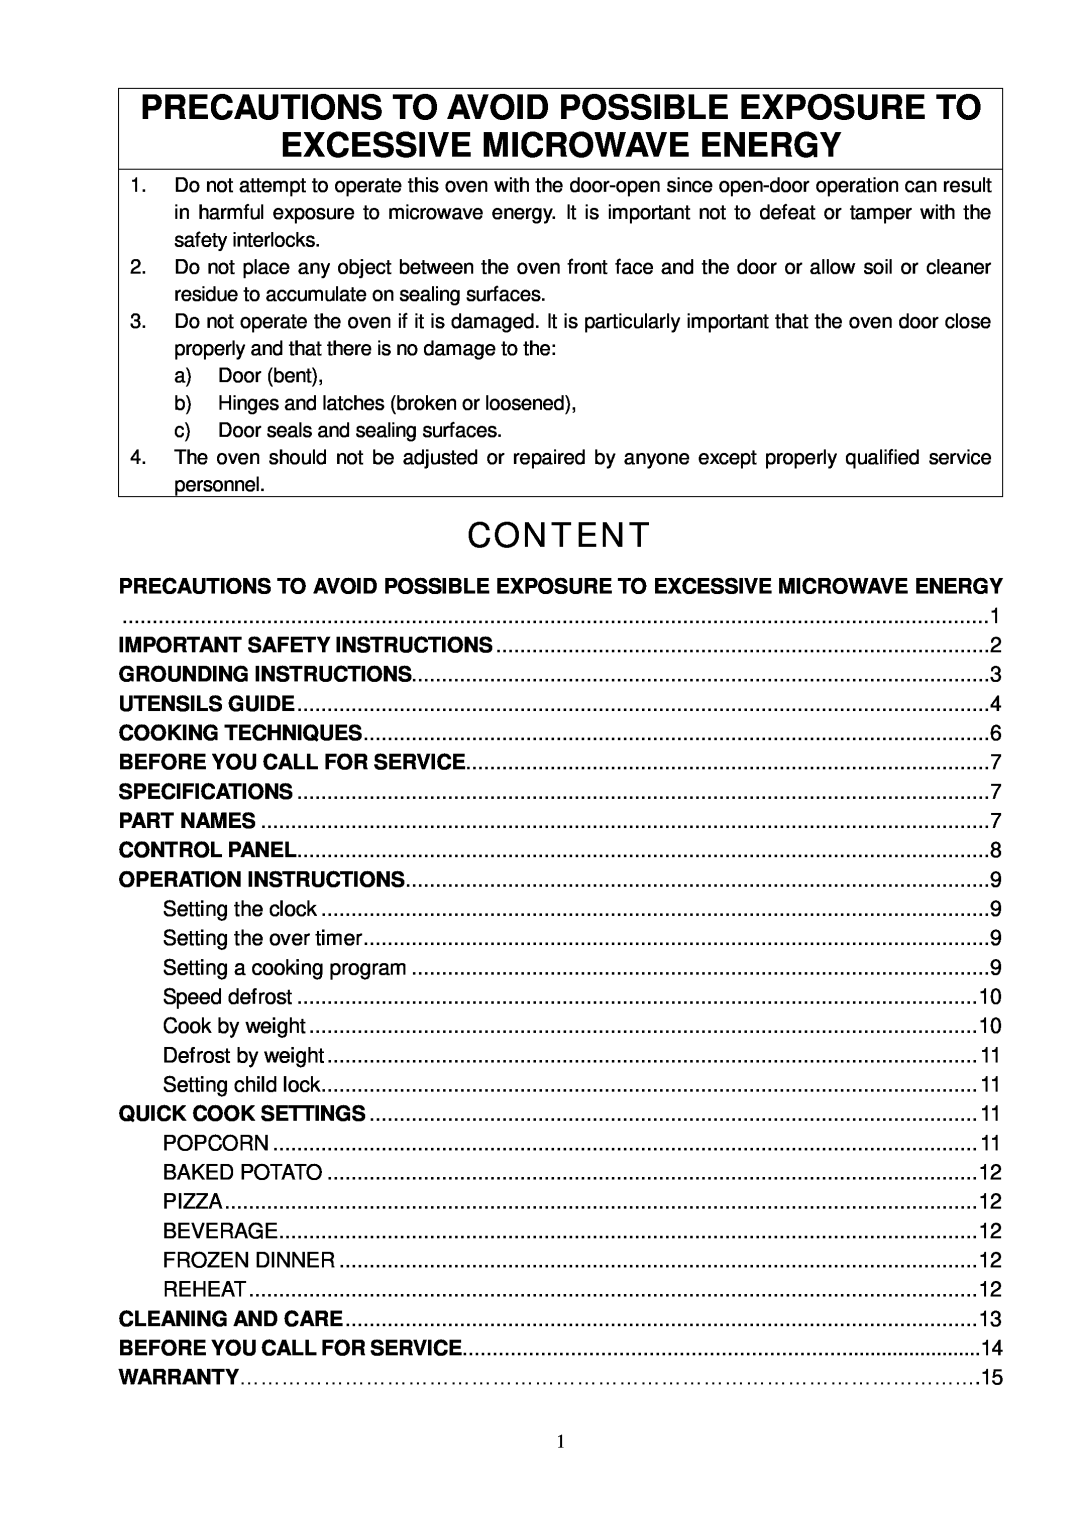 Kenmore 86059 user manual Precautions To Avoid Possible Exposure To, Excessive Microwave Energy, Content 